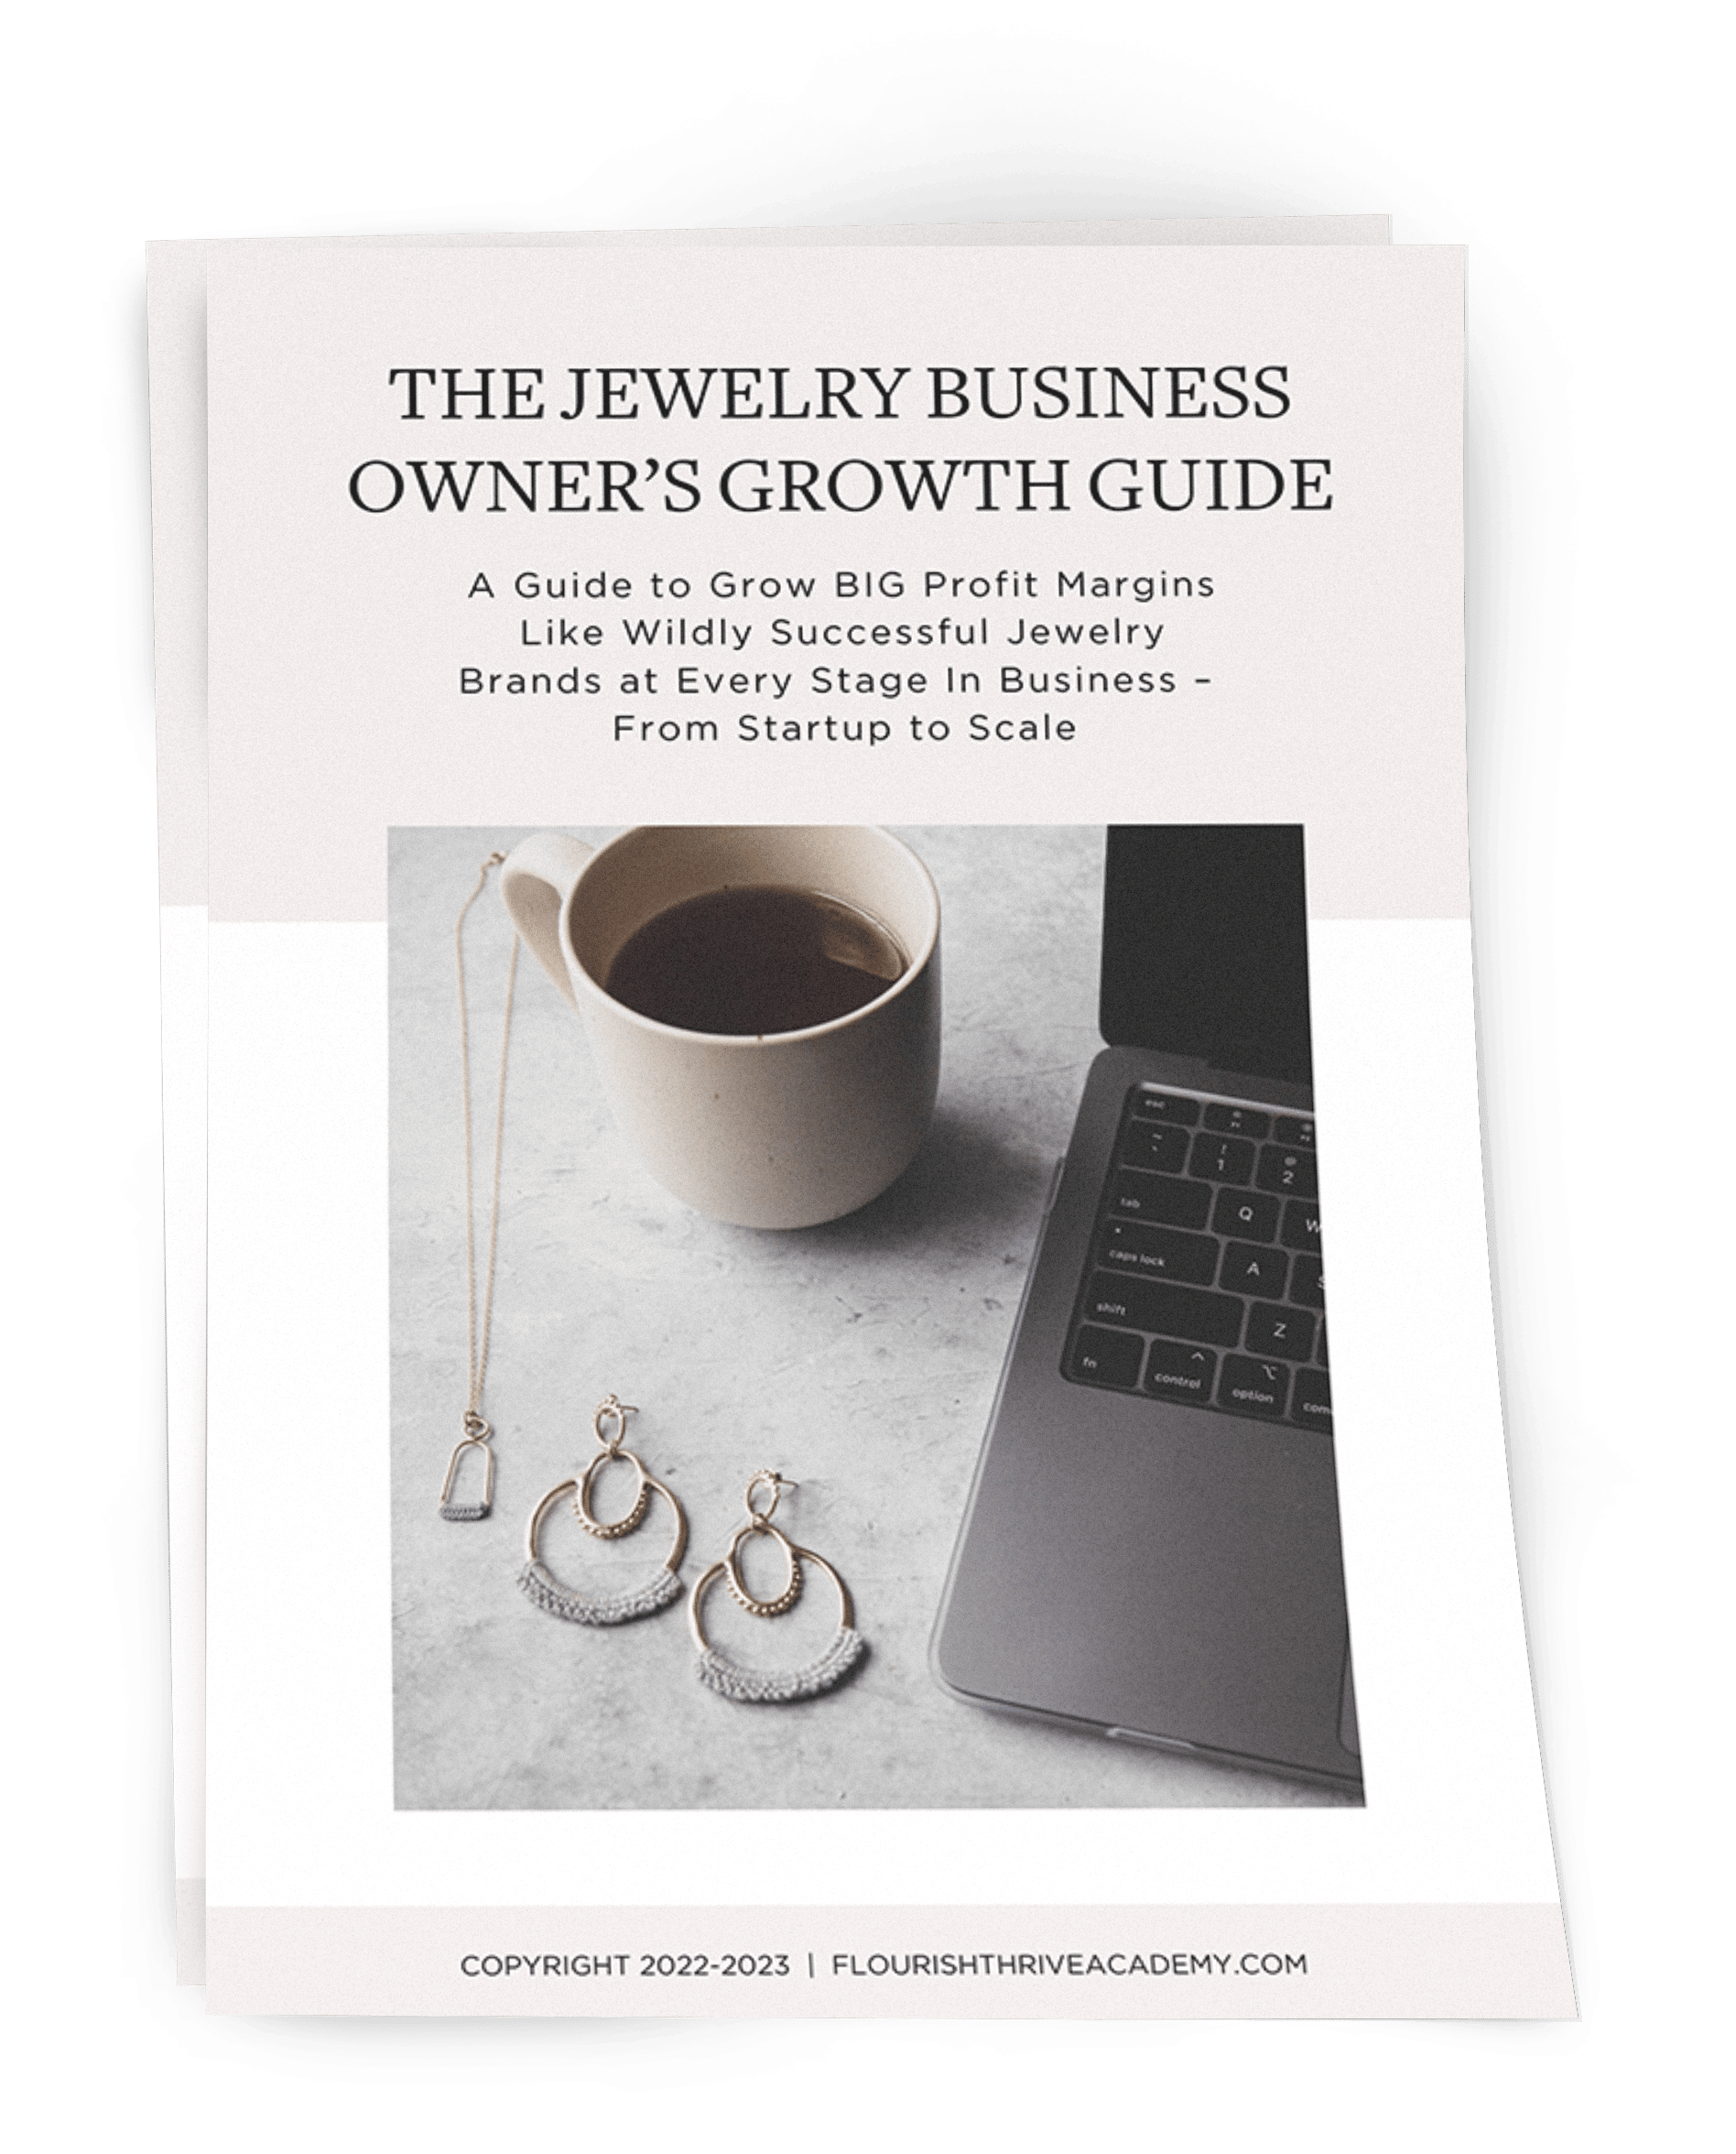 The Jewelry Business Growth Guide